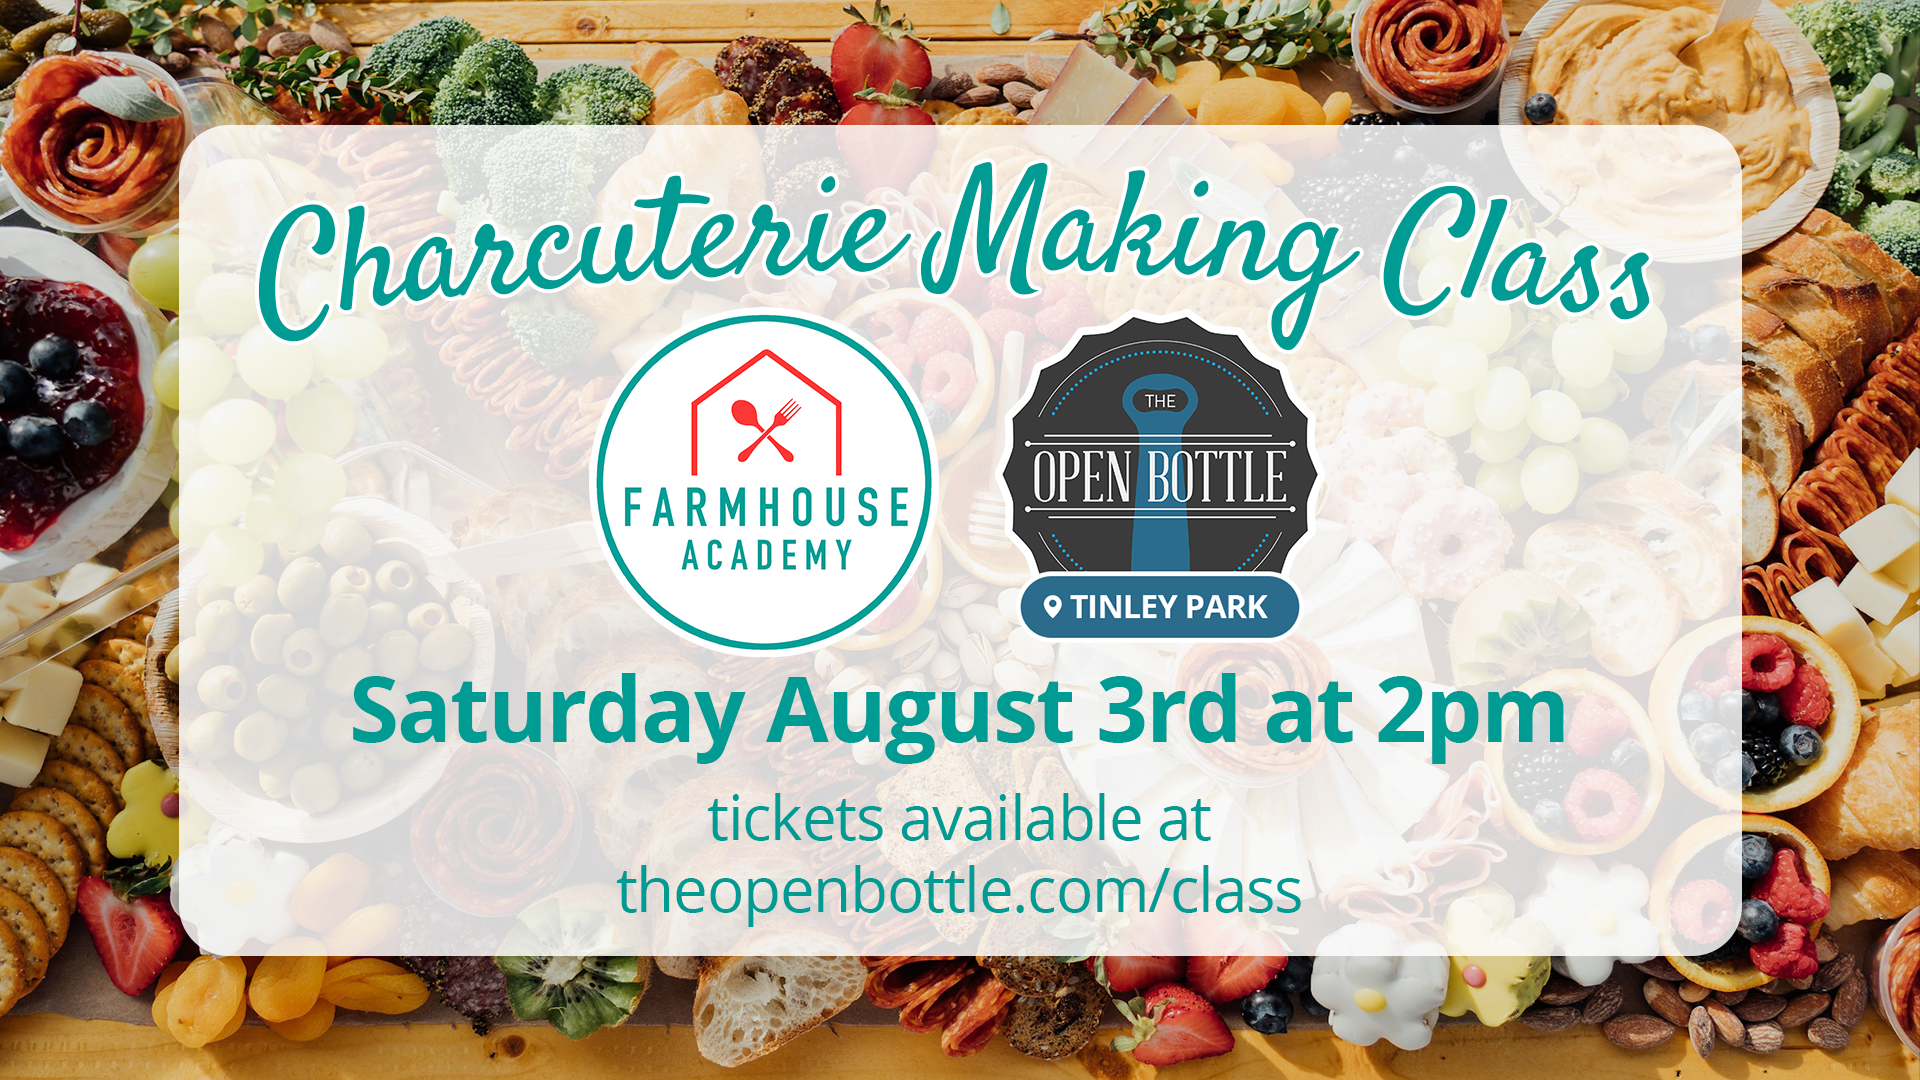 Event: Charcuterie Making Class with Farmhouse Academy